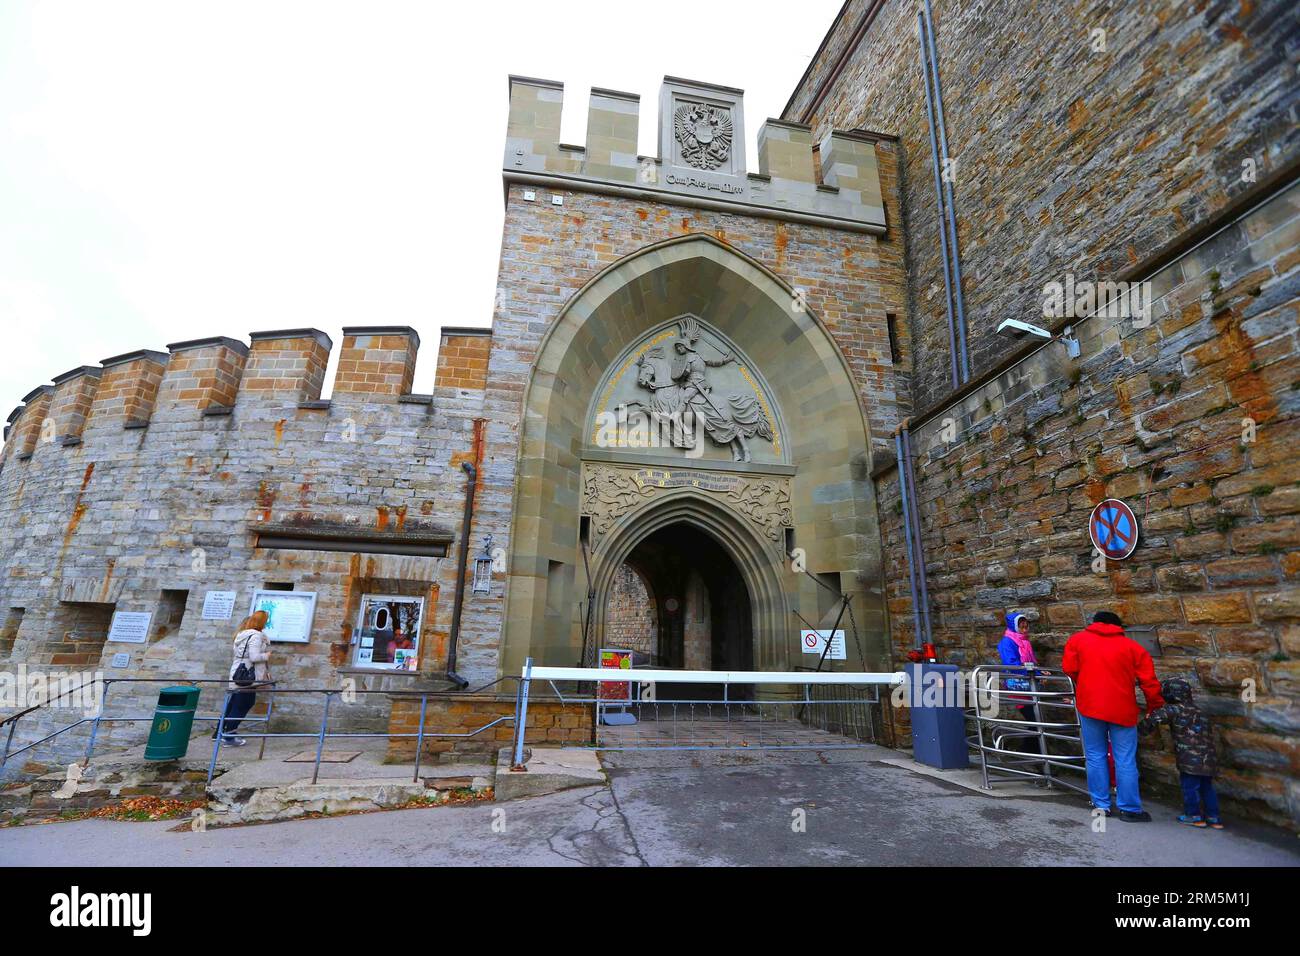 Bildnummer: 60684833  Datum: 02.11.2013  Copyright: imago/Xinhua Photo taken on Nov. 2, 2013 shows the entrance of the Burg Hohenzollern in Hechingen, Germany. Burg Hohenzollern is a castle considered to be the ancestral seat of the Hohenzollern family, which emerged in the Middle Ages and eventually became German Emperors. The castle was first constructed in the early 11th century and completely destroyed in 1423. The current version of the castle was rebuilt in mid-19th century. The castle becomes a popular tourist destination today as it is still privately owned by the descendants of the Ho Stock Photo